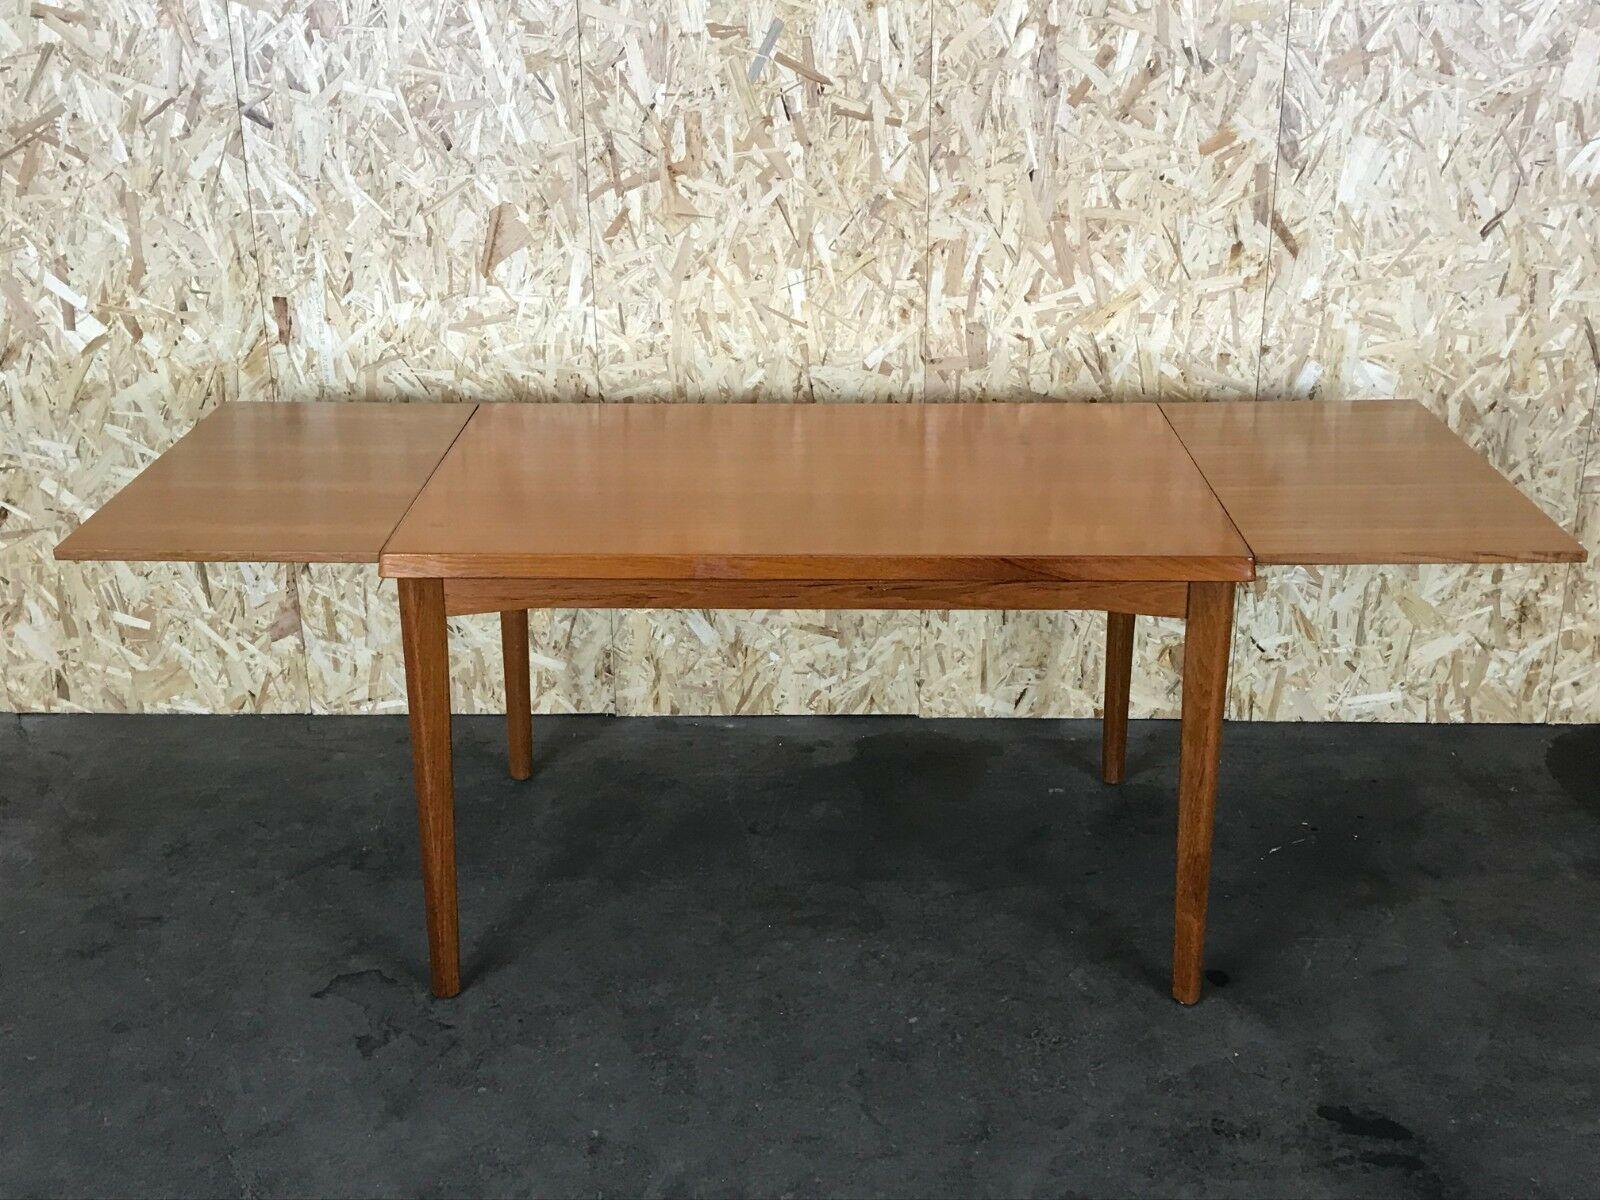 60s 70s teak table dining table Burchardt-Nielsen Danish design

Object: dining table

Manufacturer: Burchard Nielsen

Condition: good

Age: around 1960-1970

Dimensions:

120cm x 80cm x 74cm (+ 2x 45cm)

Other notes:

The pictures